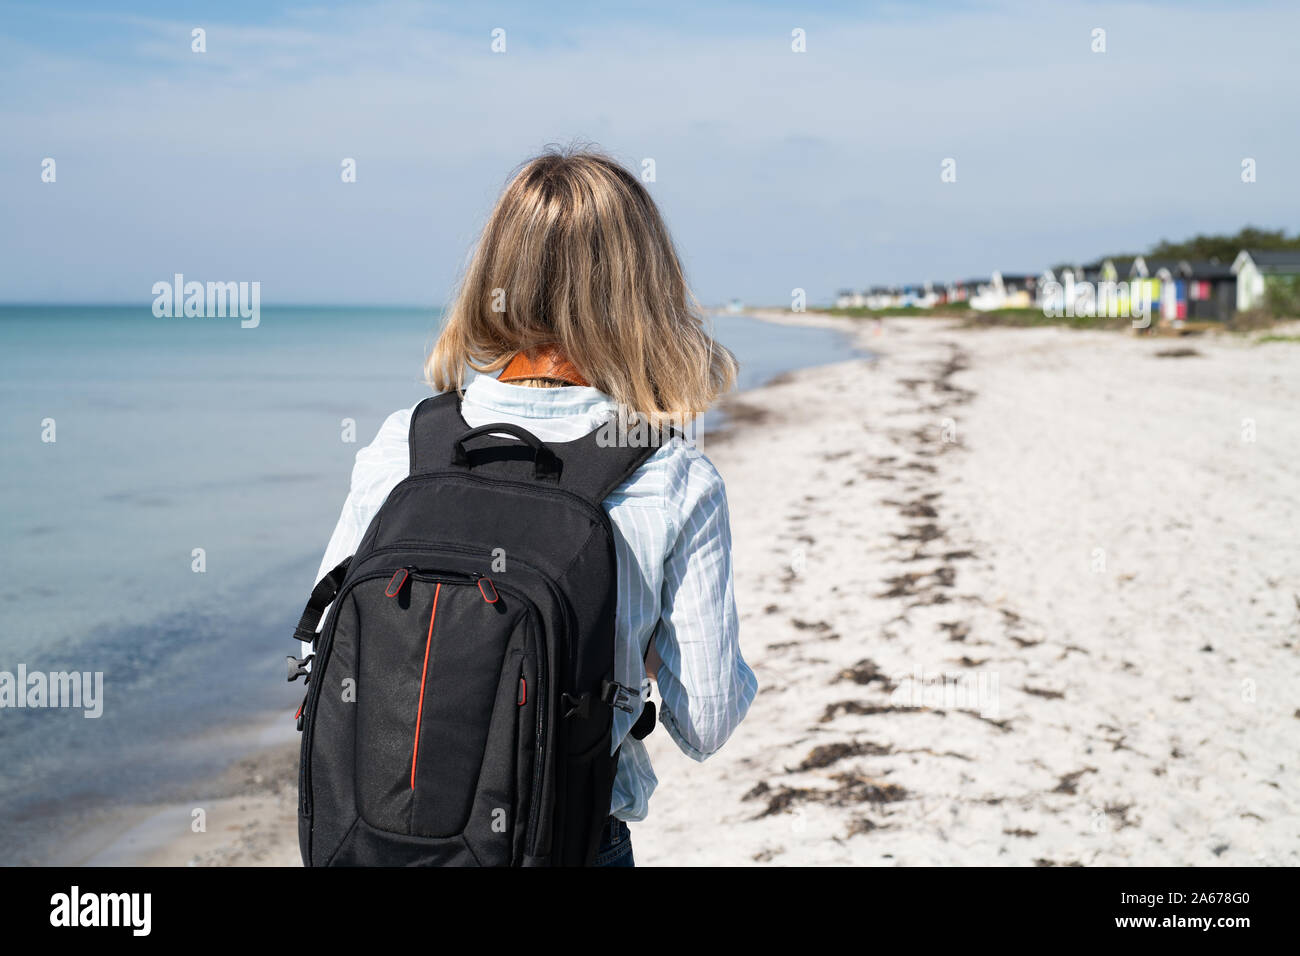 woman with backpack on beach Stock Photo